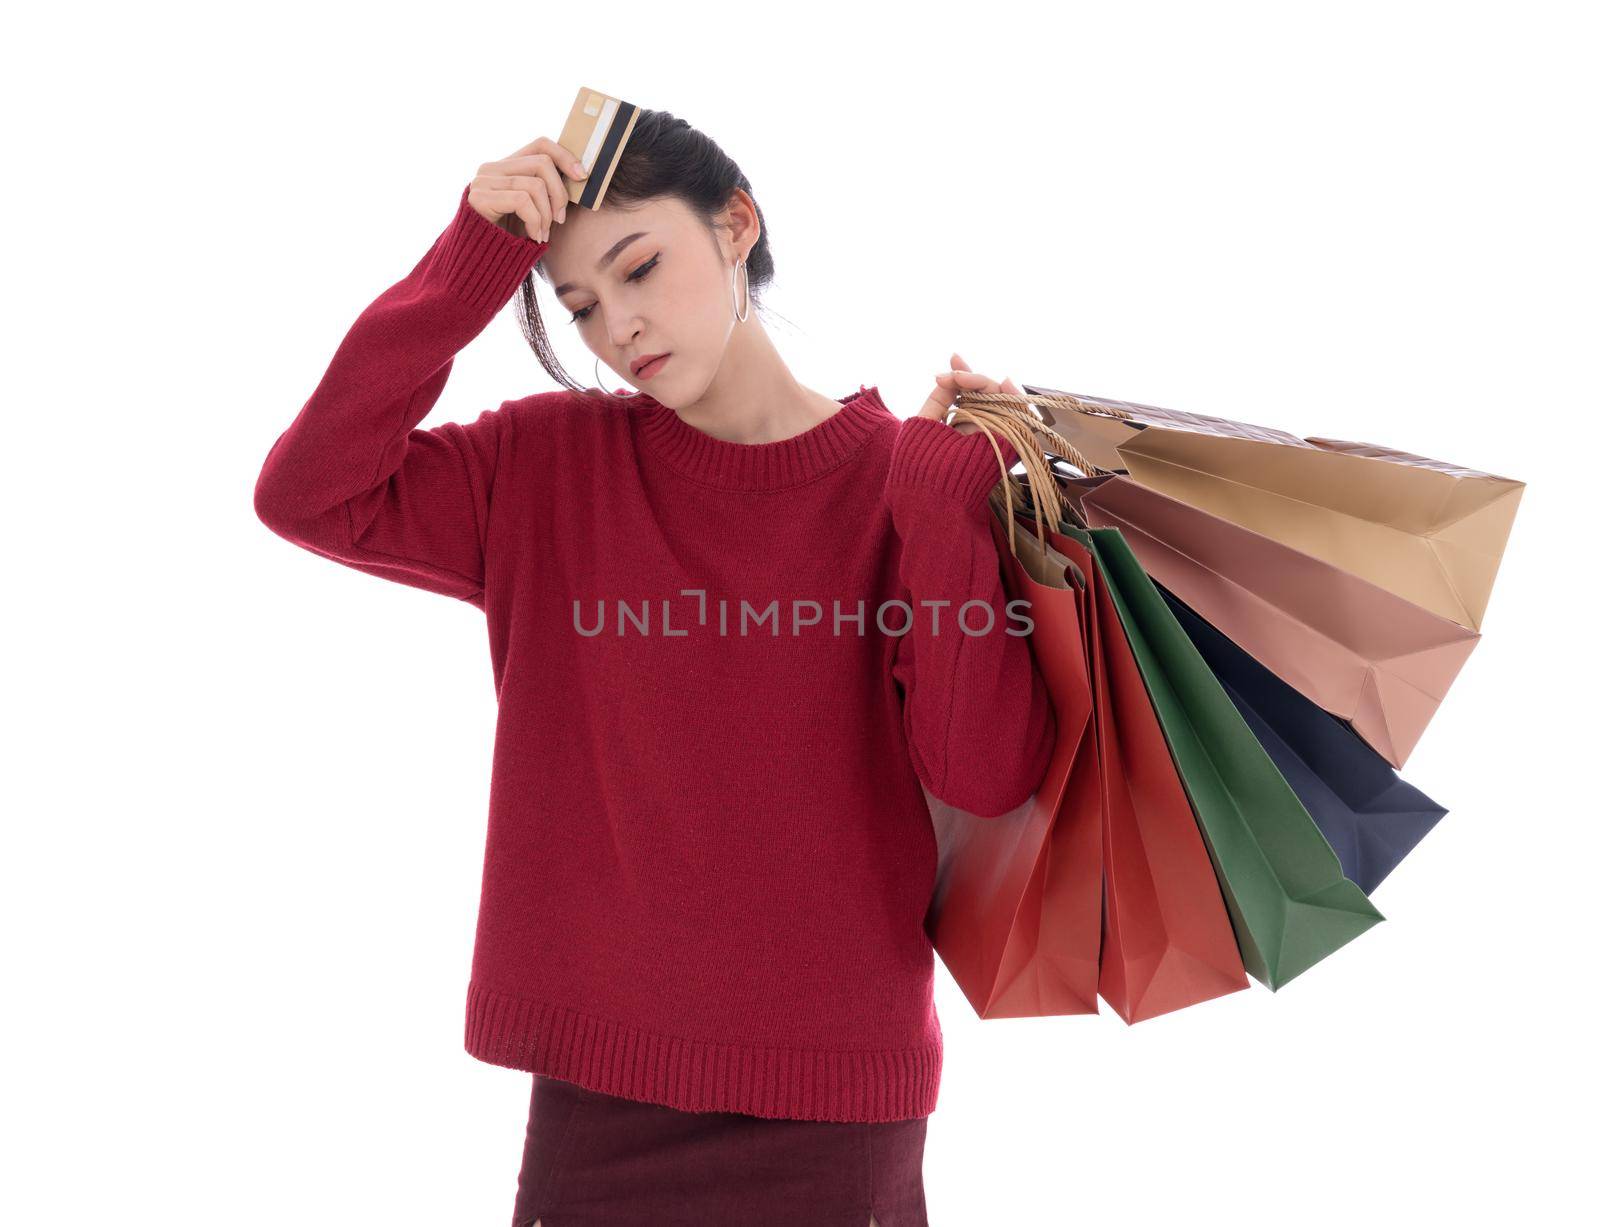 stressed woman holding credit card and shopping bag isolated on white background by geargodz